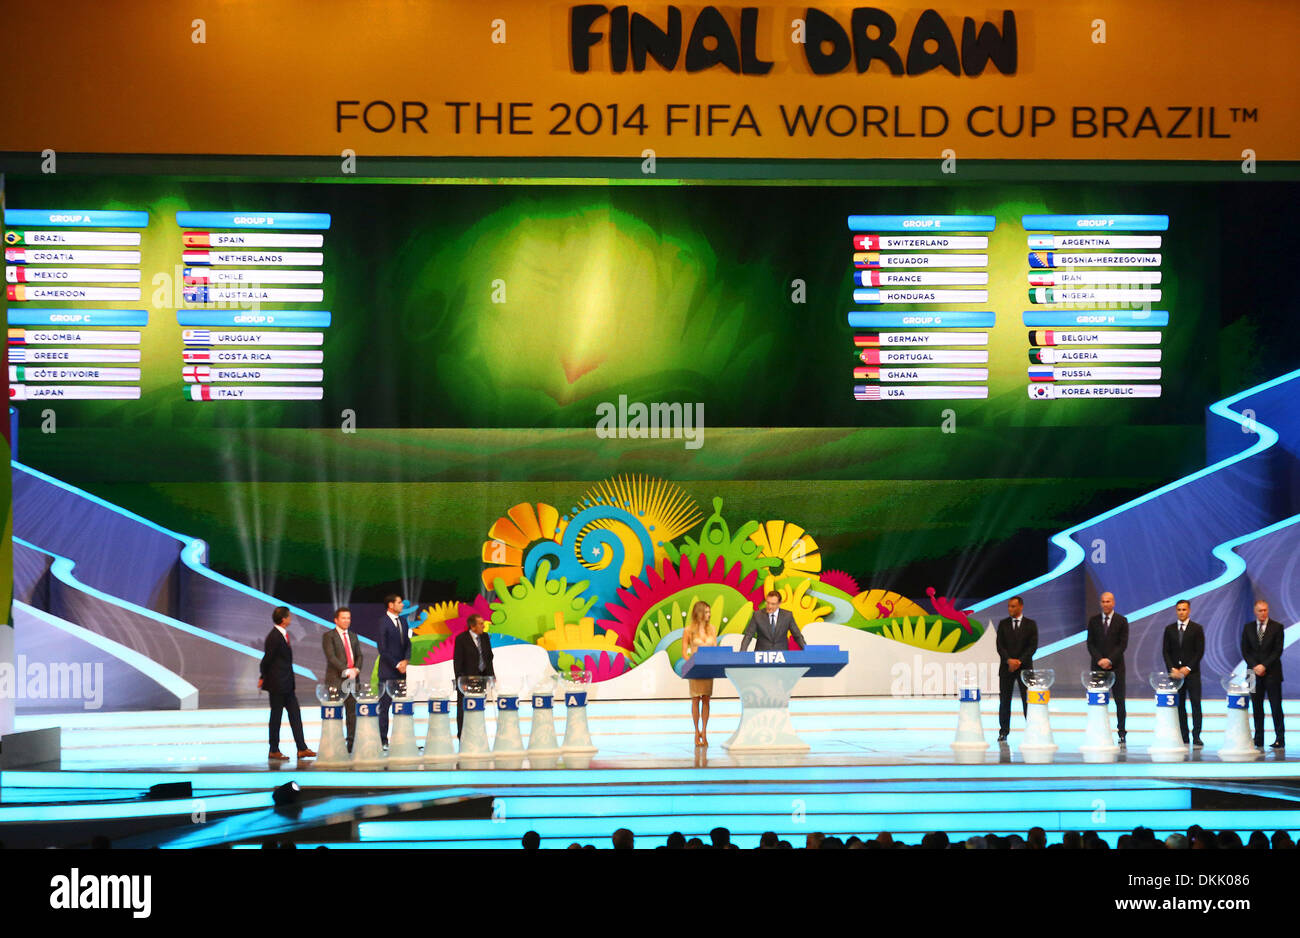 Costa Do Sauipe, Brazil. 6th Dec, 2013. Photo taken on Dec. 6, 2013 shows the ceremony of the final draw for the groups and matchups of the 2014 FIFA World Cup Brazil in Costa do Sauipe, Brazil. Credit:  Xinhua/Alamy Live News Stock Photo